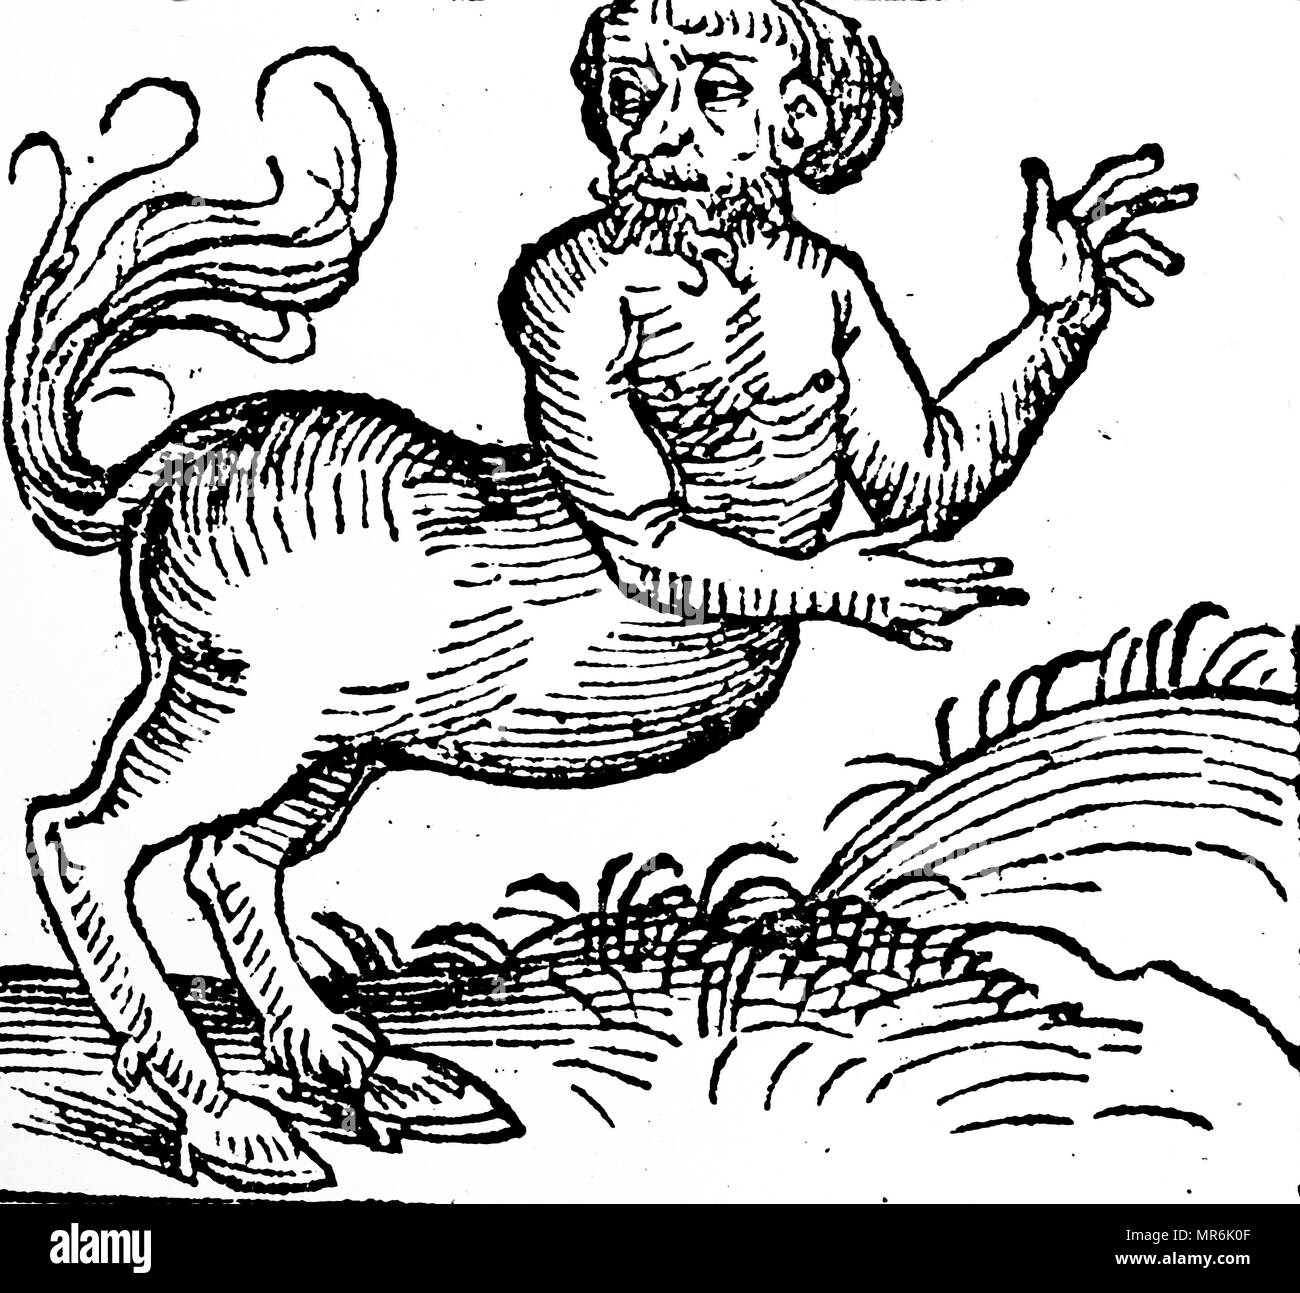 Woodblock engraving depicting a centaur, a mythological creature with the upper body of a human and the lower body and legs of a horse. Dated 15th century Stock Photo